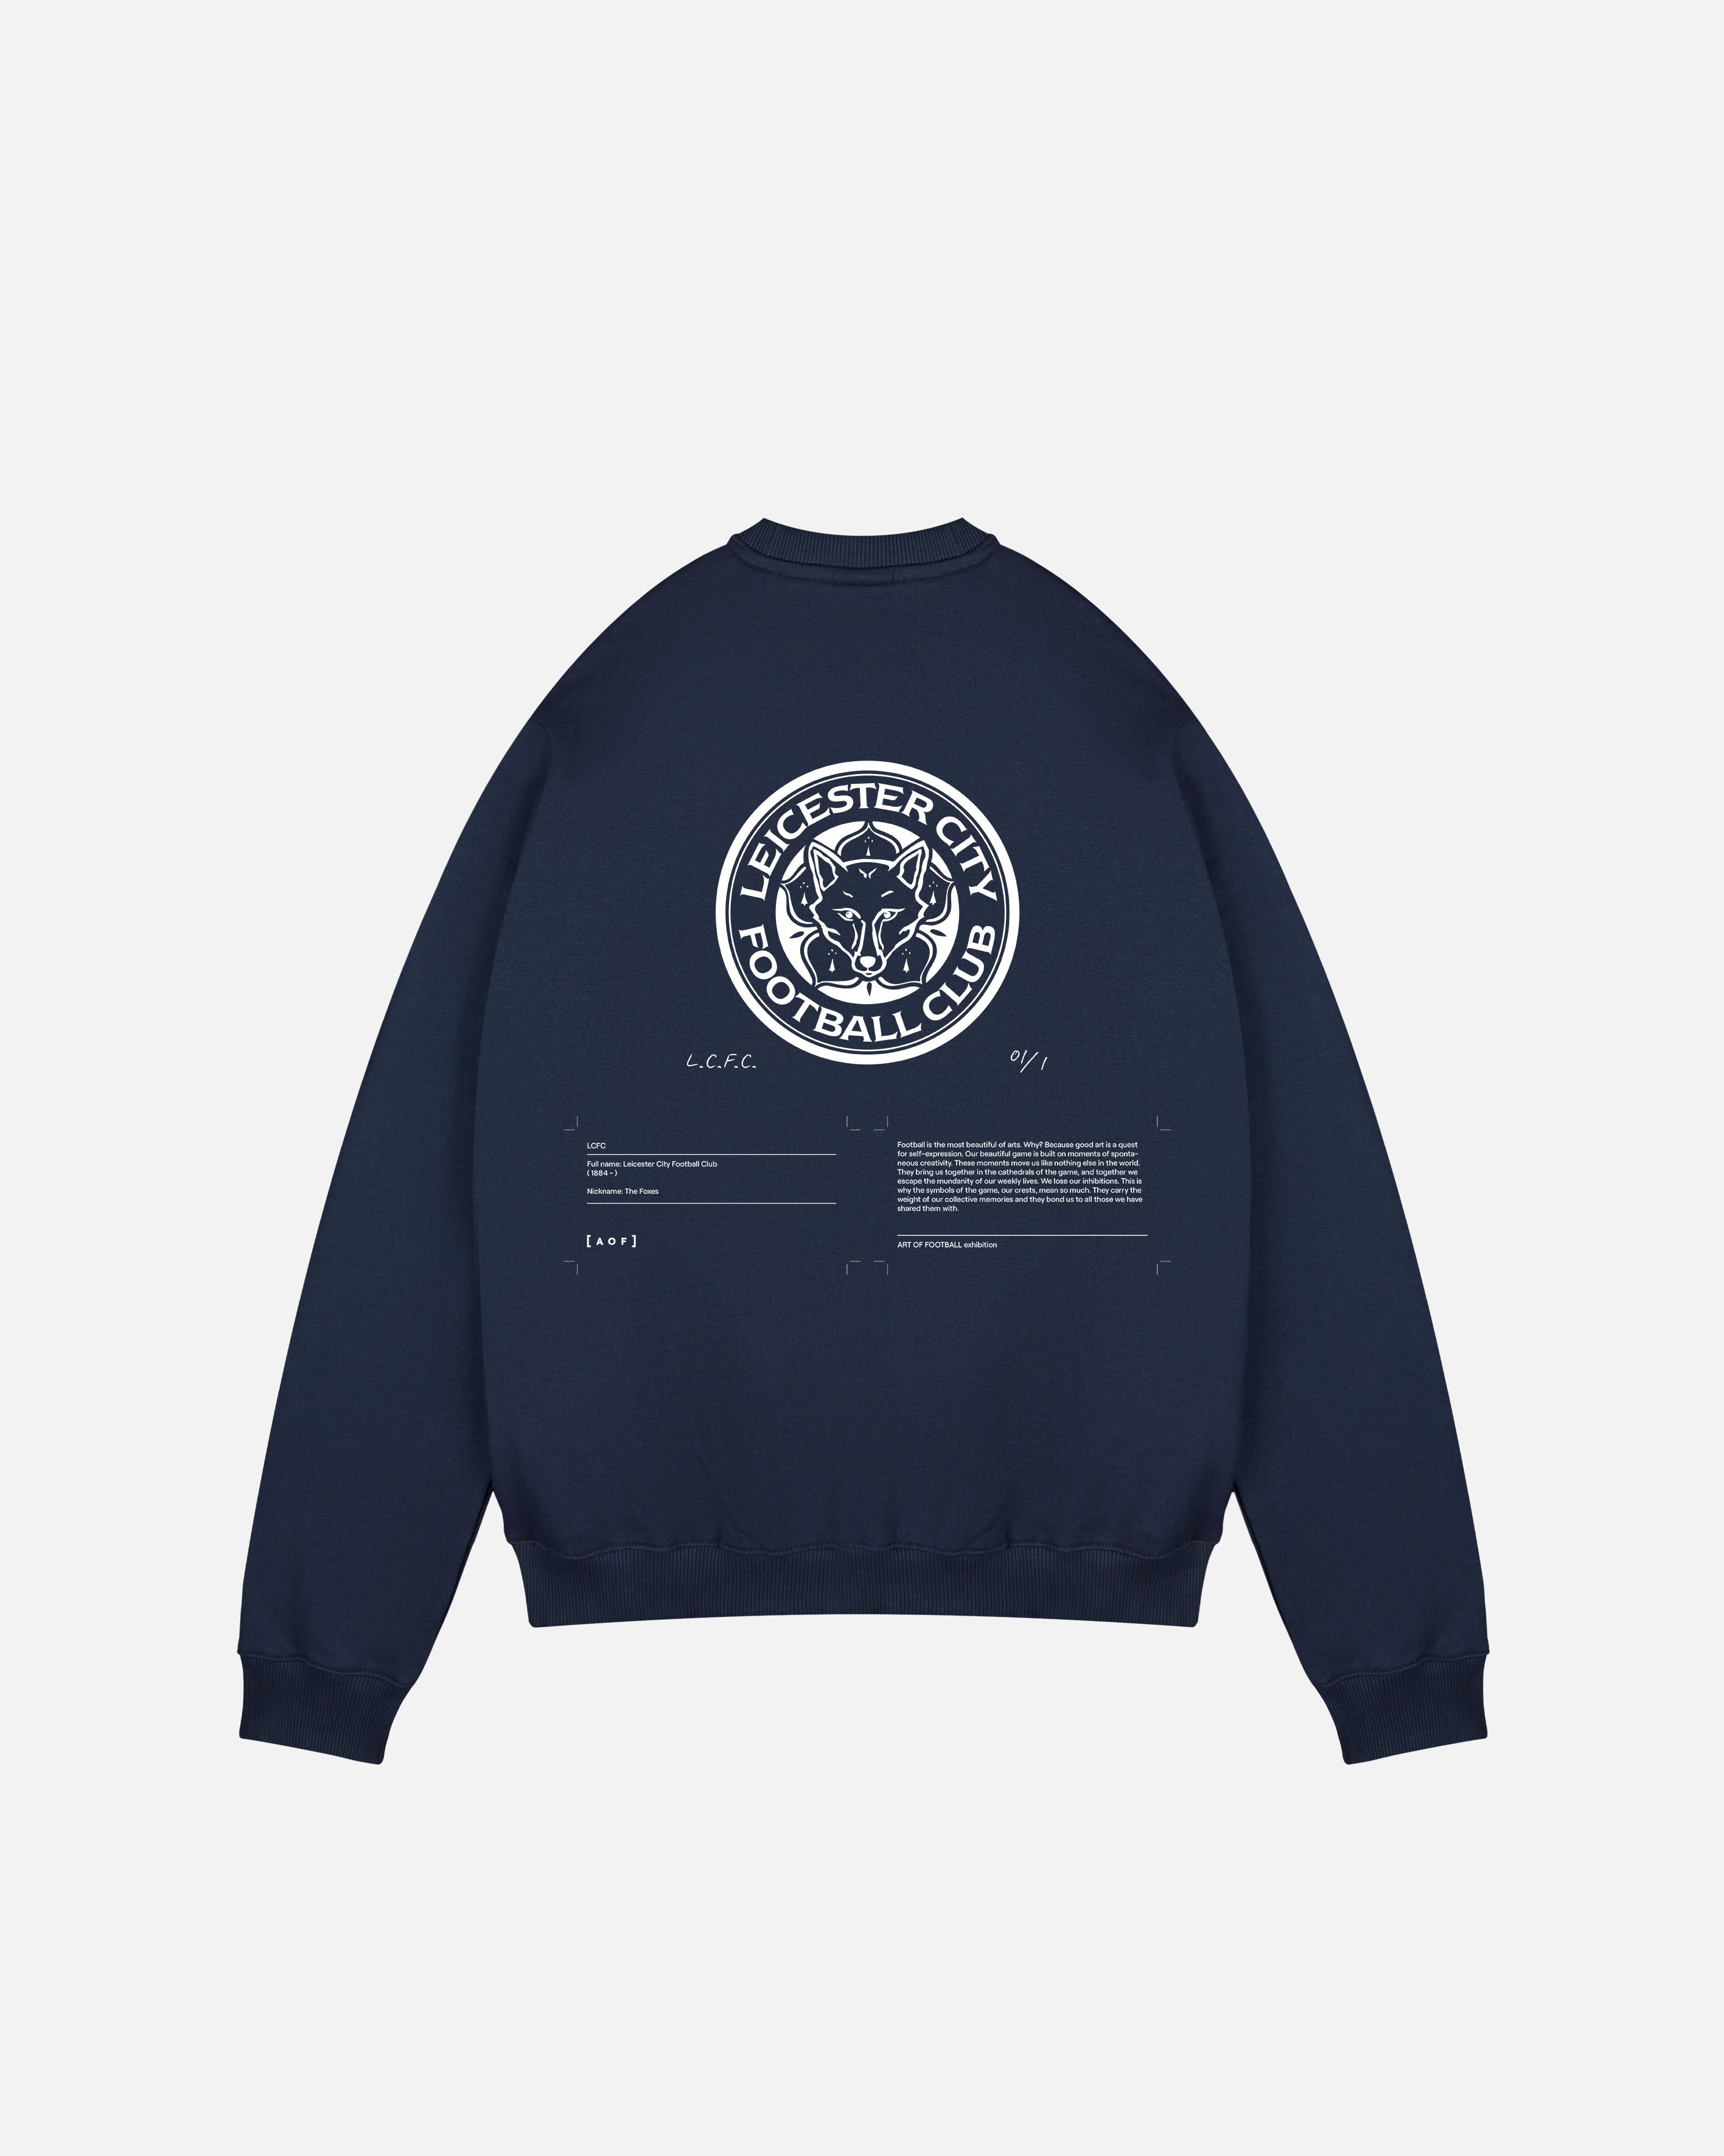 AOF x Leicester - Exhibition - Navy Sweat